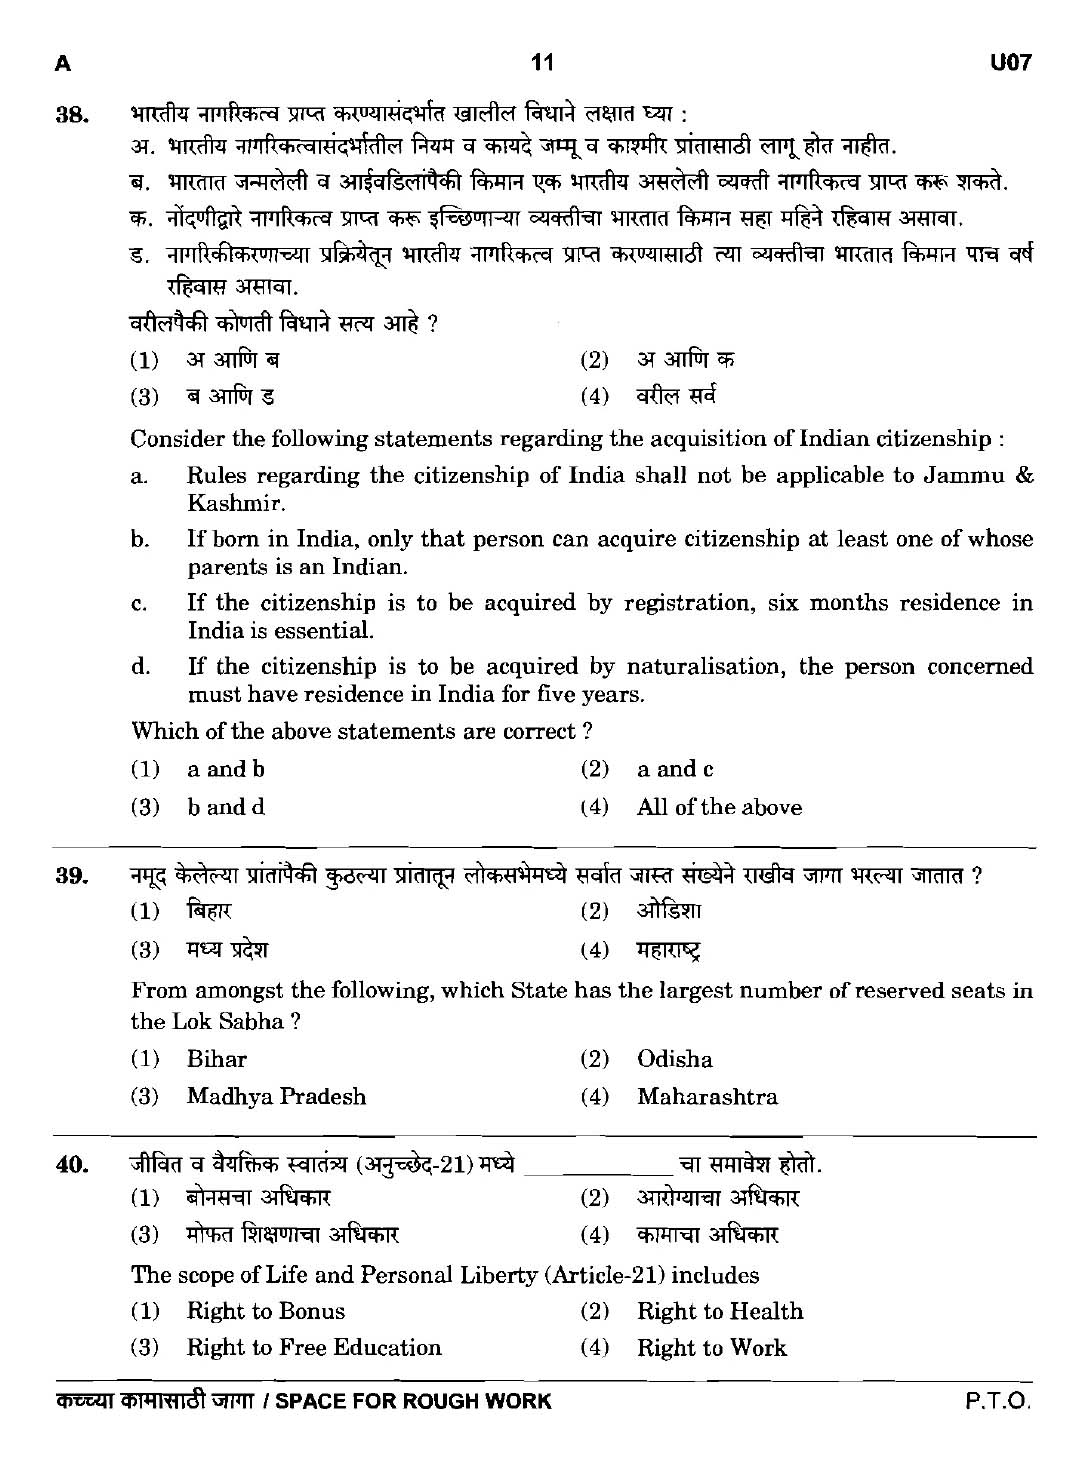 MPSC Agricultural Services Preliminary Exam 2016 Question Paper 10